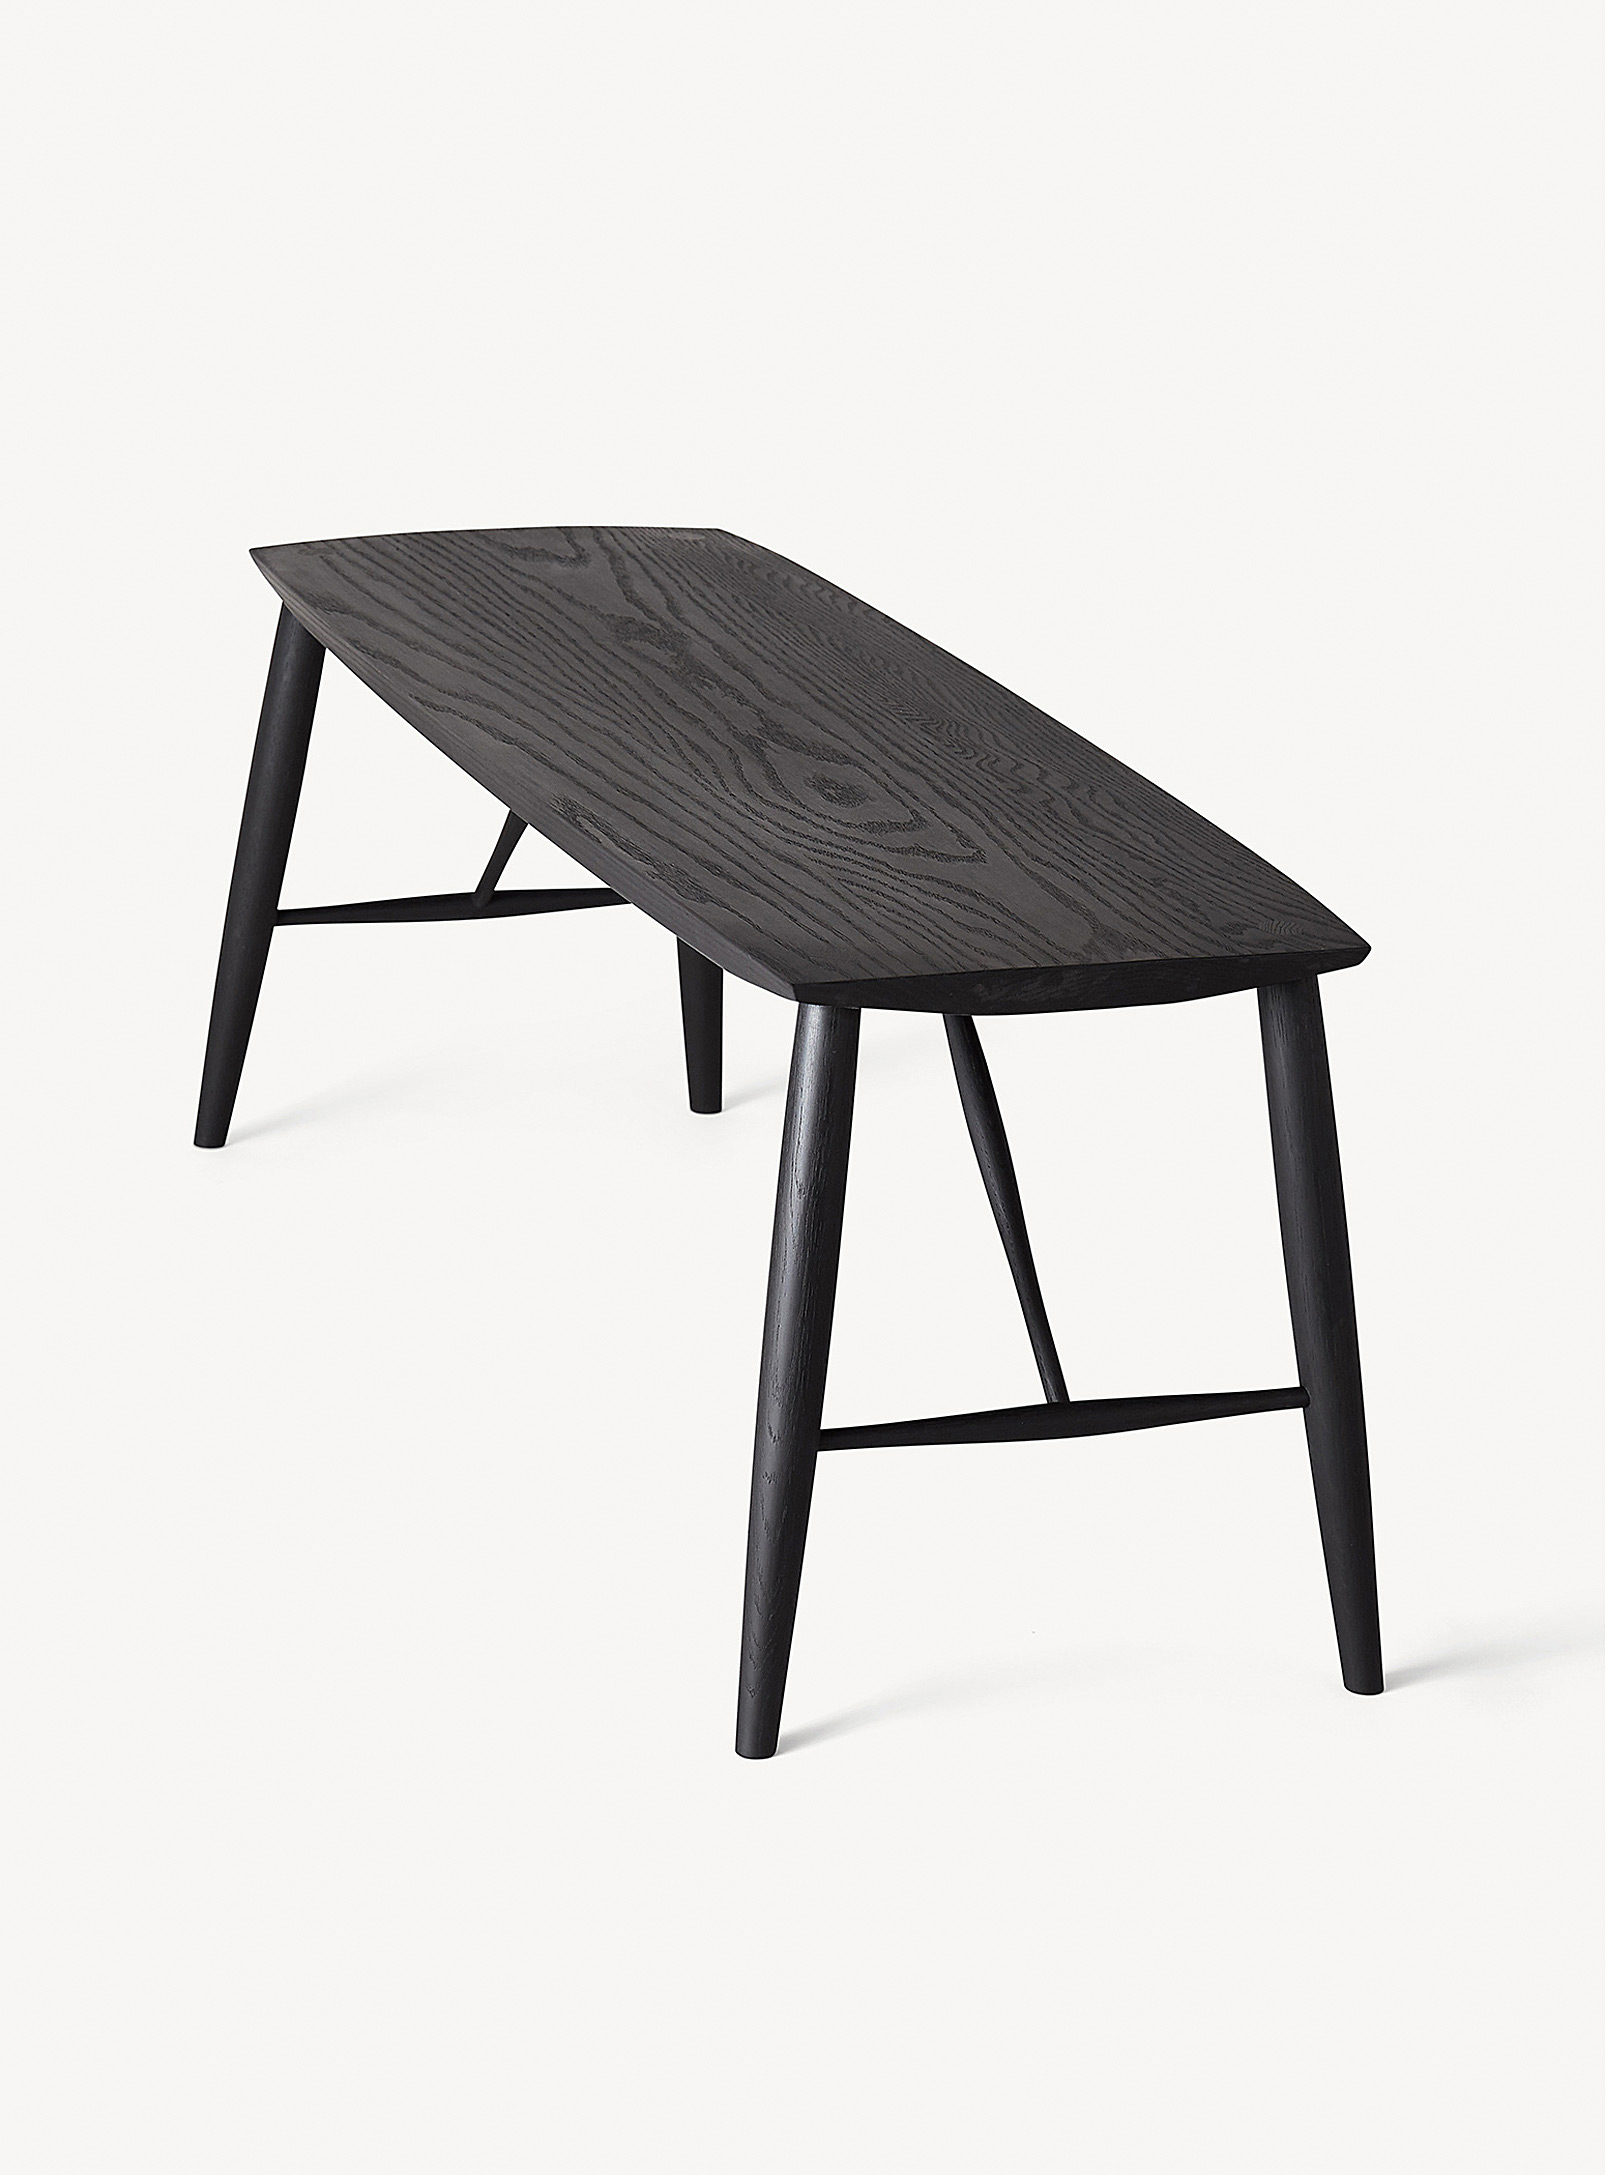 Coolican & Company Adelaide Bench In Black